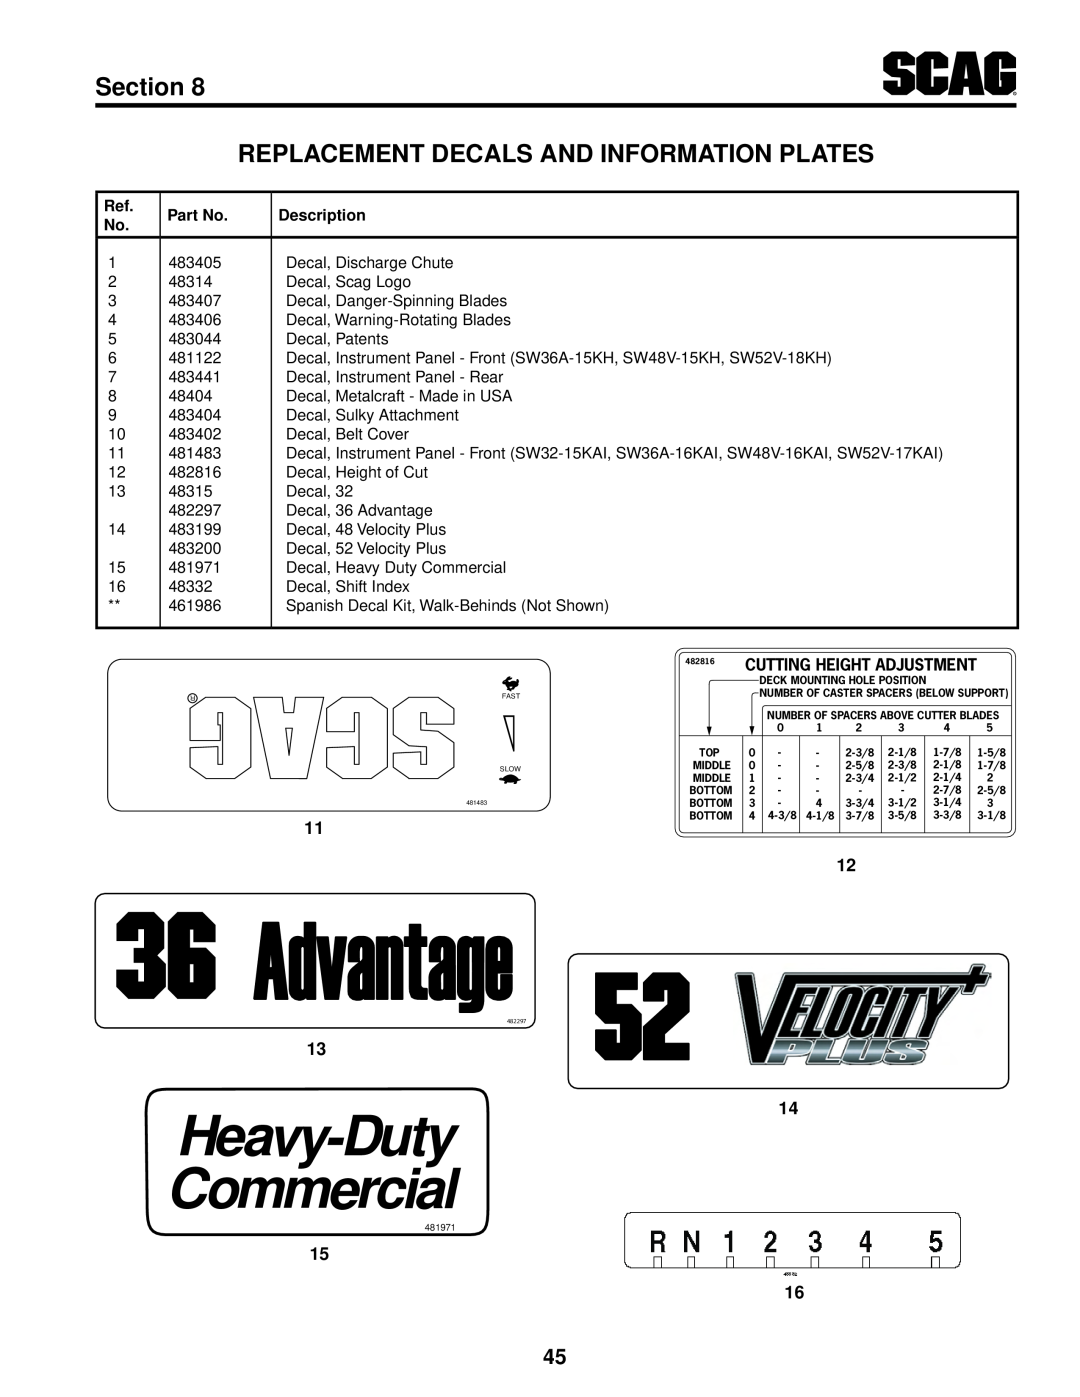 Scag Power Equipment SW48V-15KH Section REPLACEMENT DECALS AND INFORMATION PLATES, Heavy-Duty Commercial, Description 